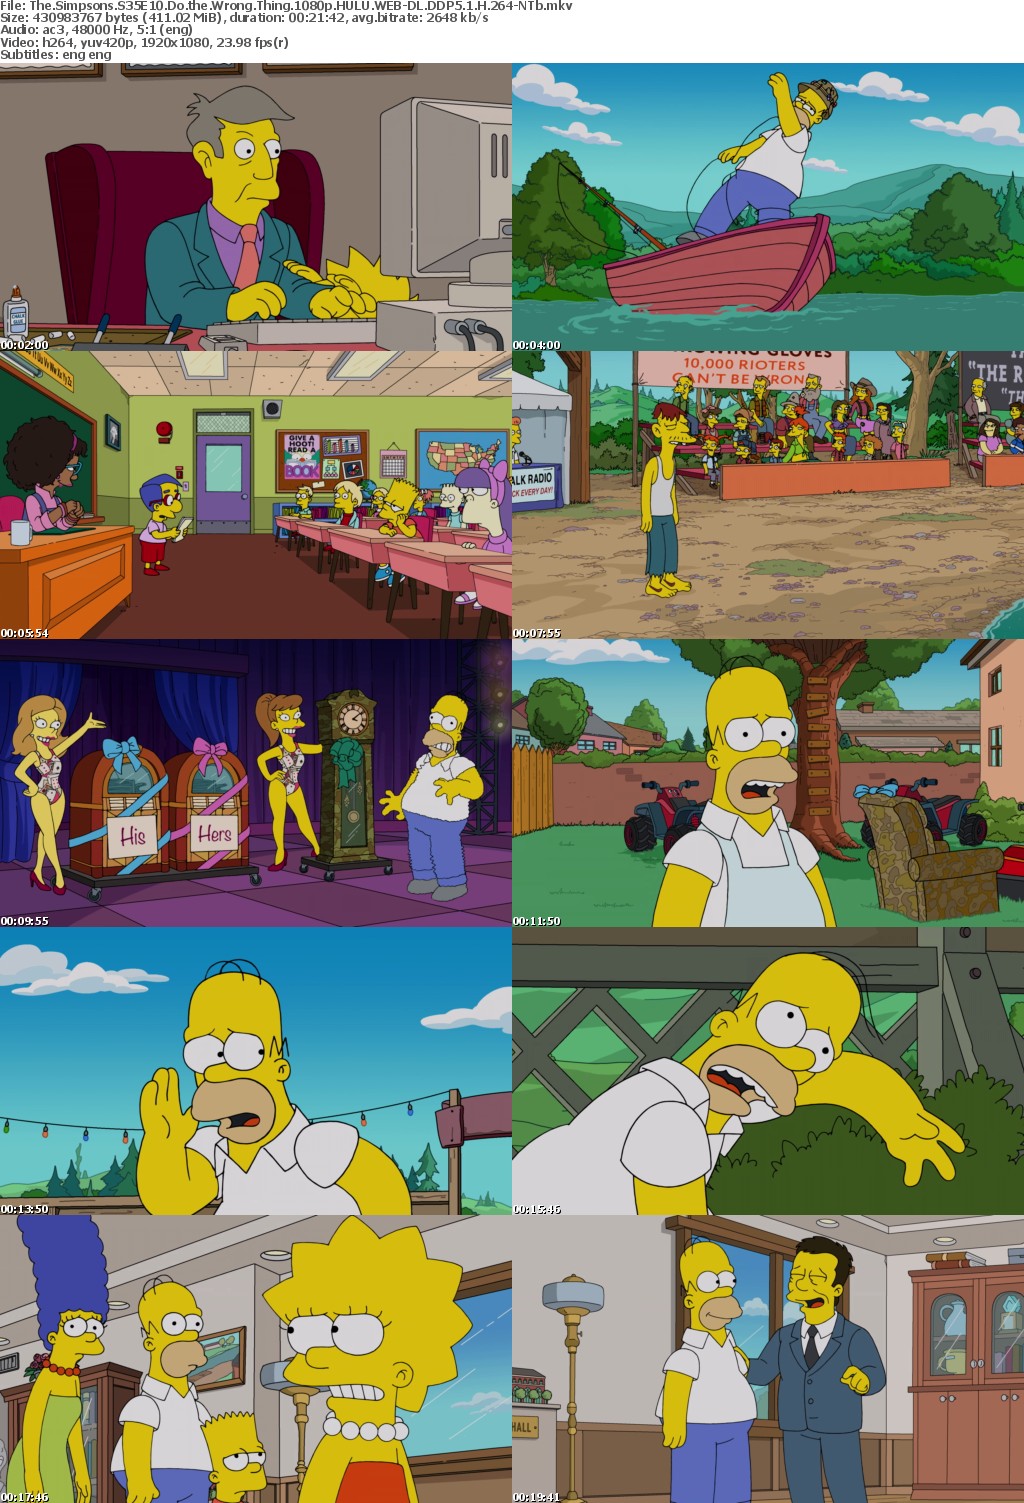 The Simpsons S35E10 Do the Wrong Thing 1080p HULU WEB-DL DDP5 1 H 264-NTb